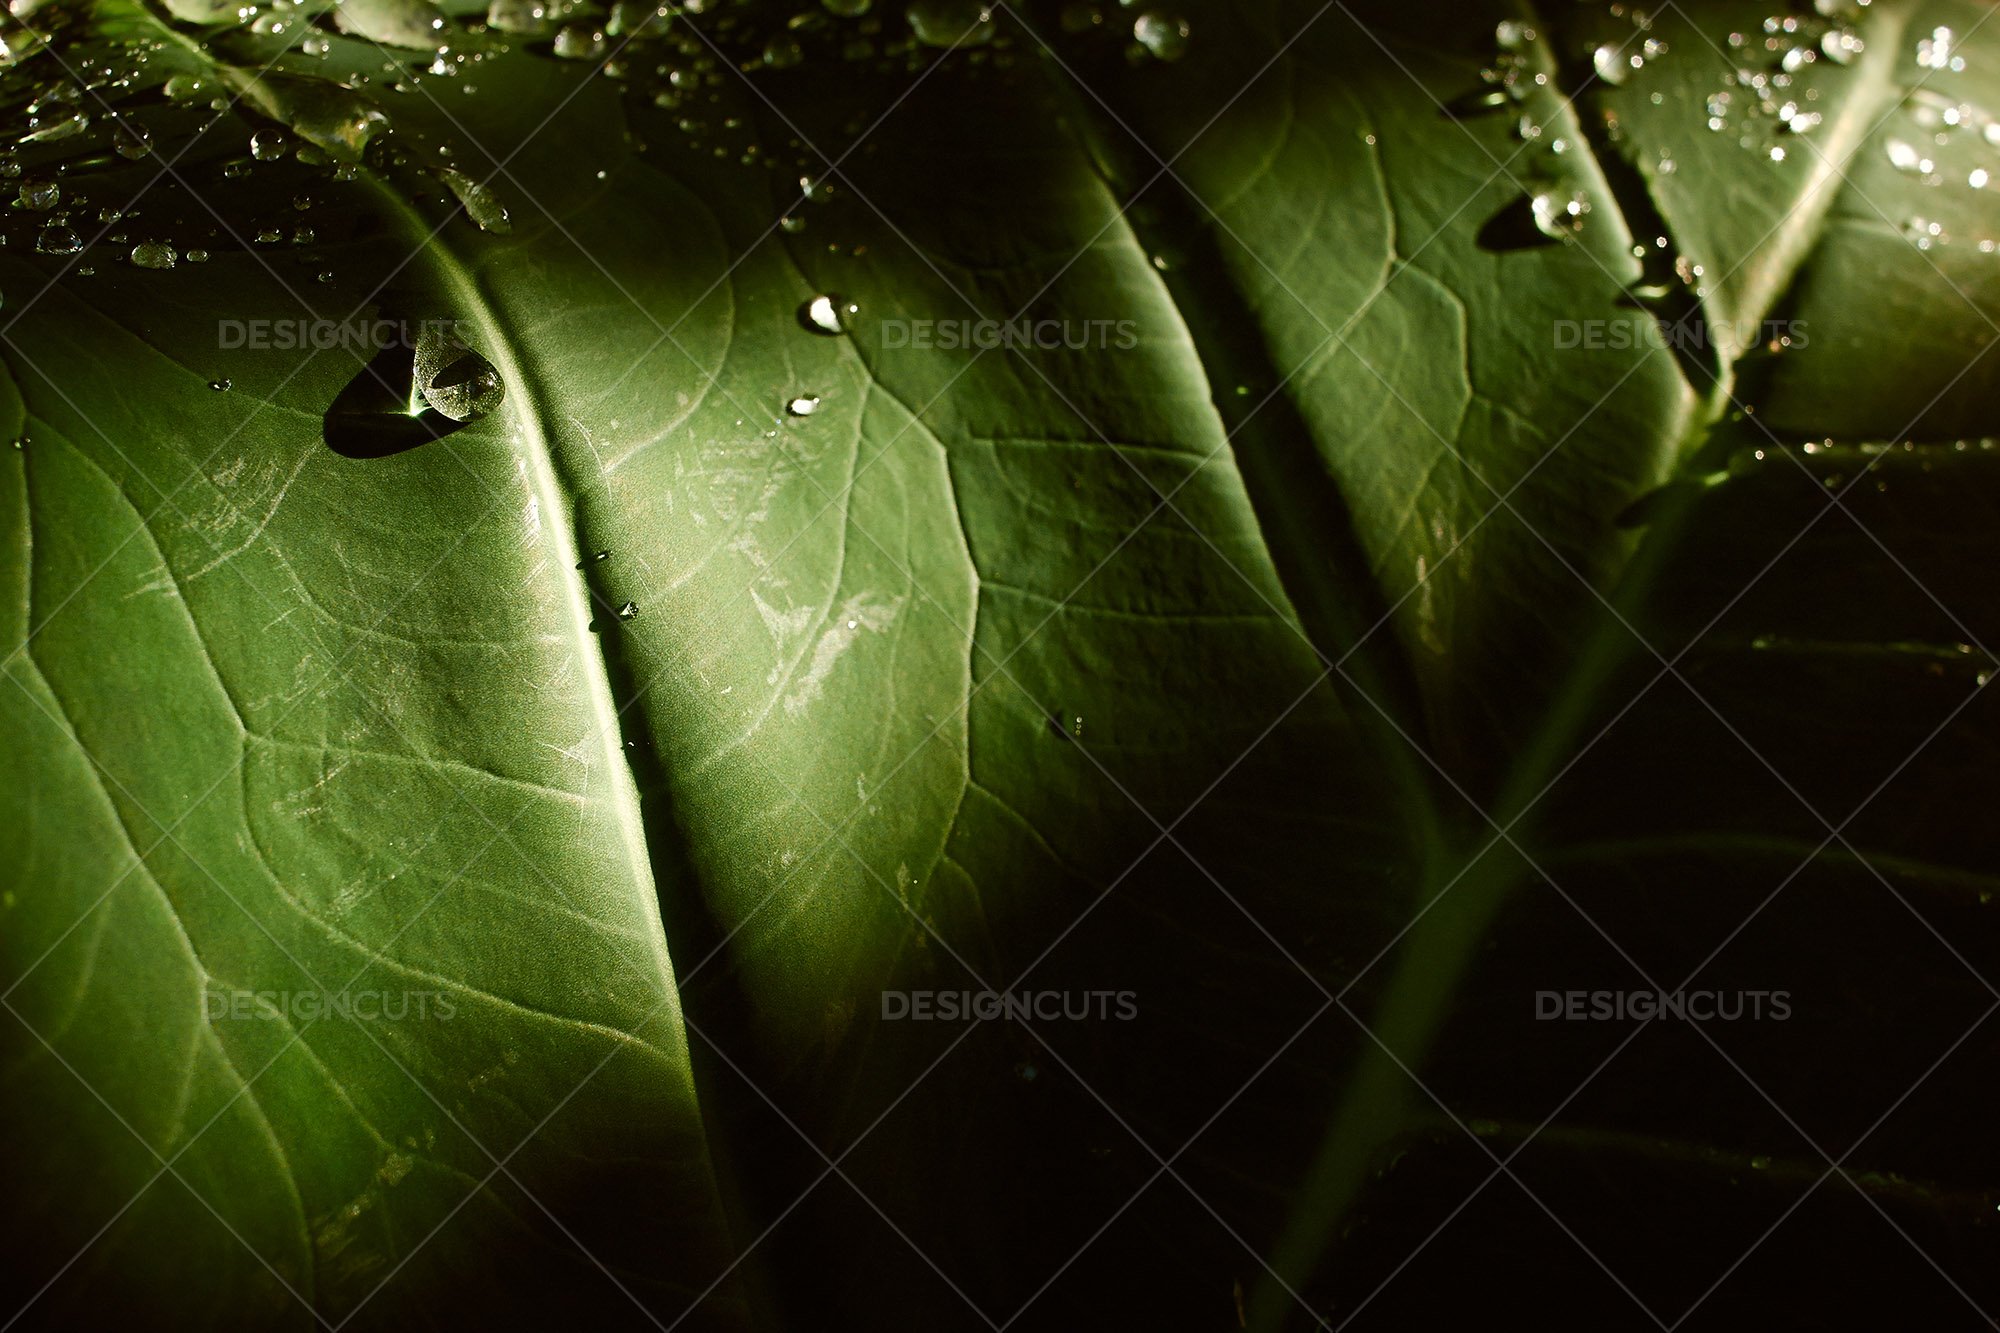 Still Life Close Up Of Water Droplets On Palm Leaf